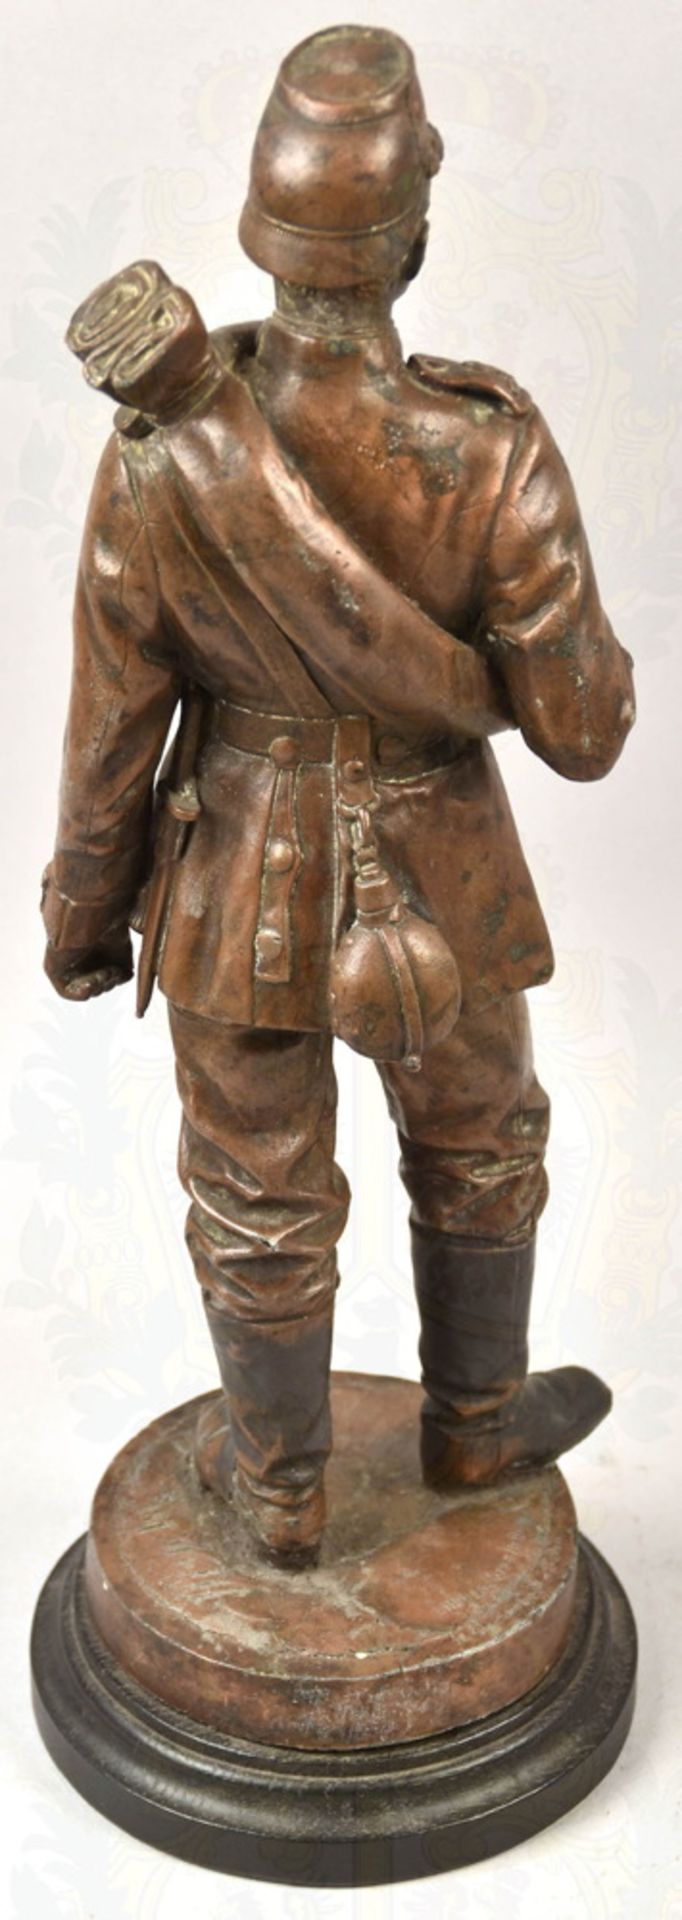 Statuette of a crew member Airship Battalion No. 1 - Image 3 of 4